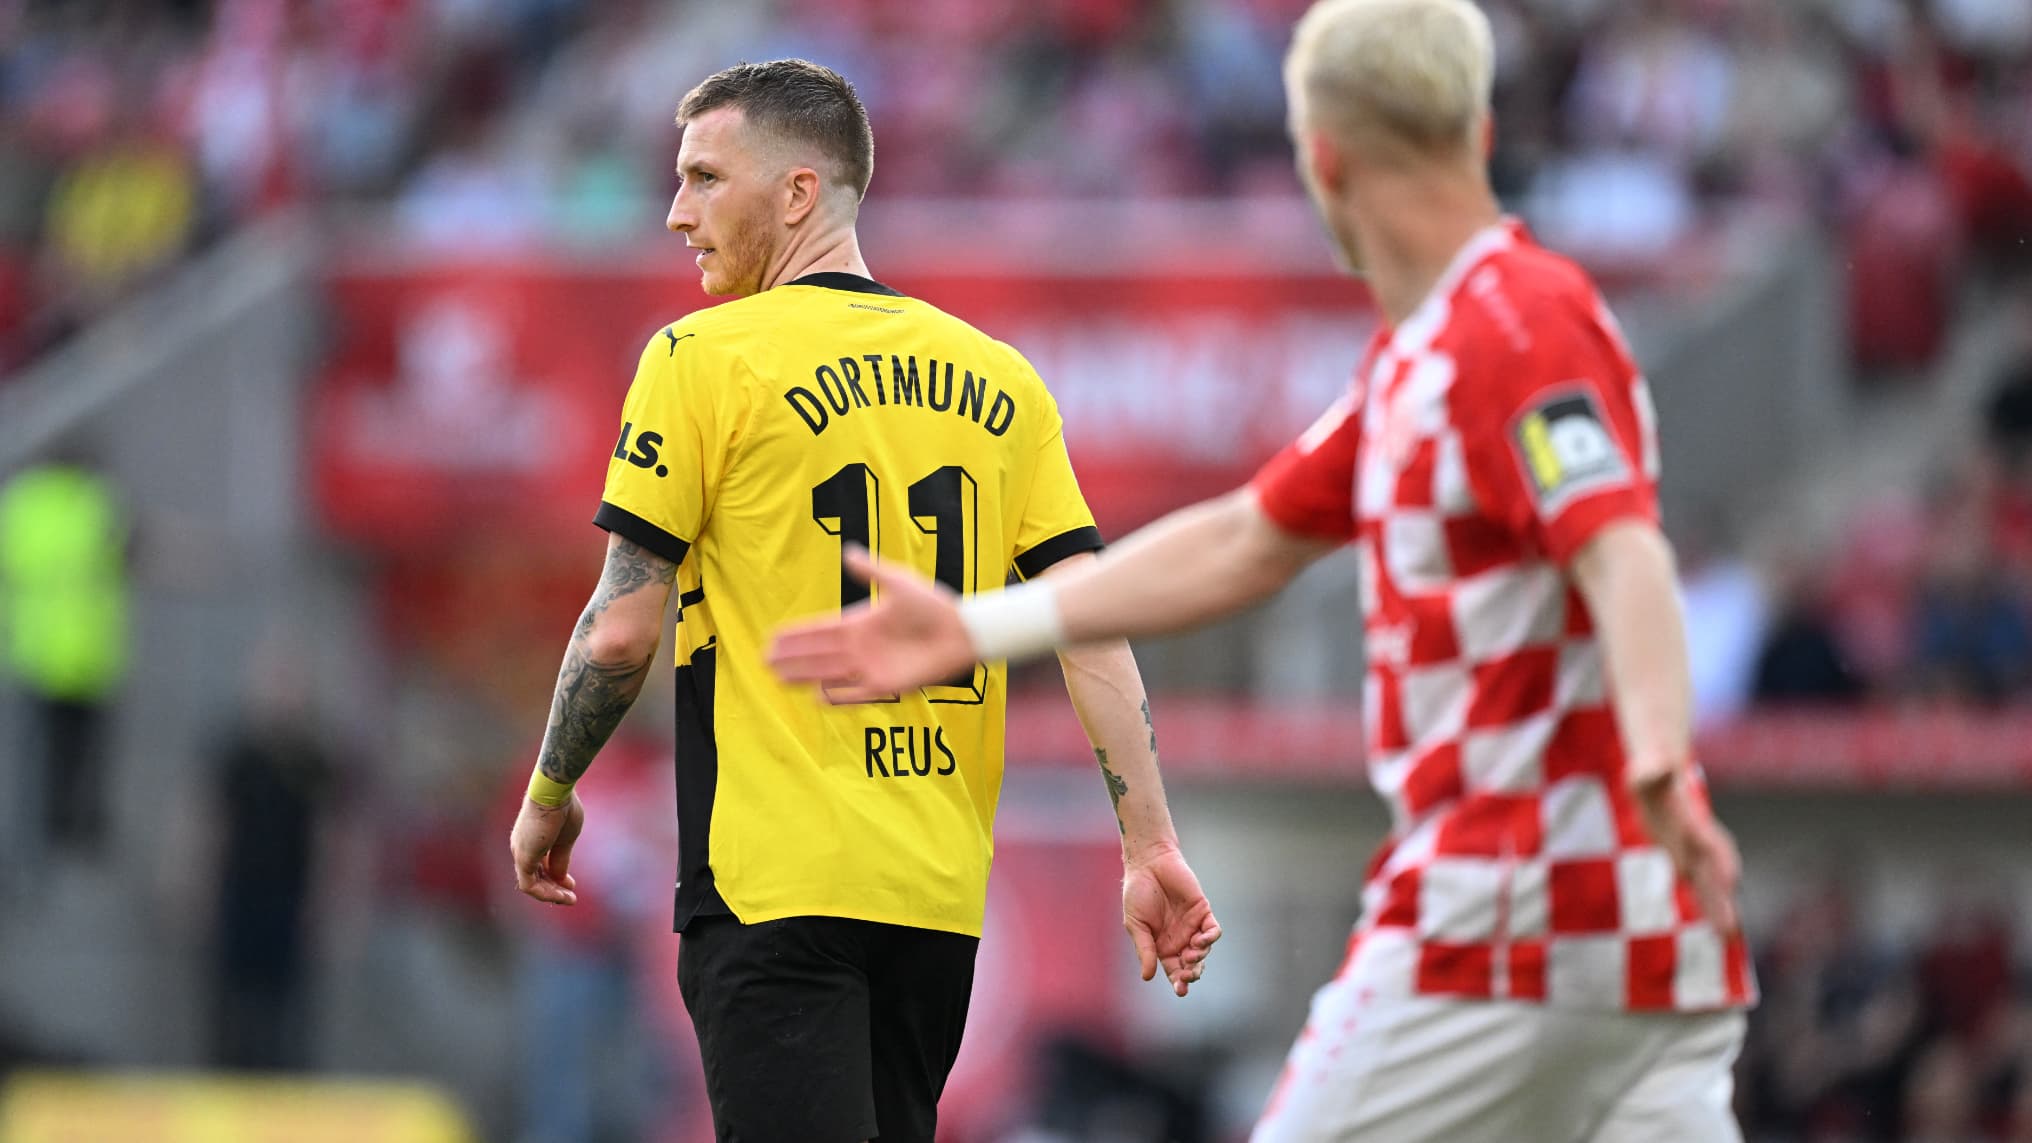 after eliminating PSG in the Champions League, Dortmund take a beating at Mainz